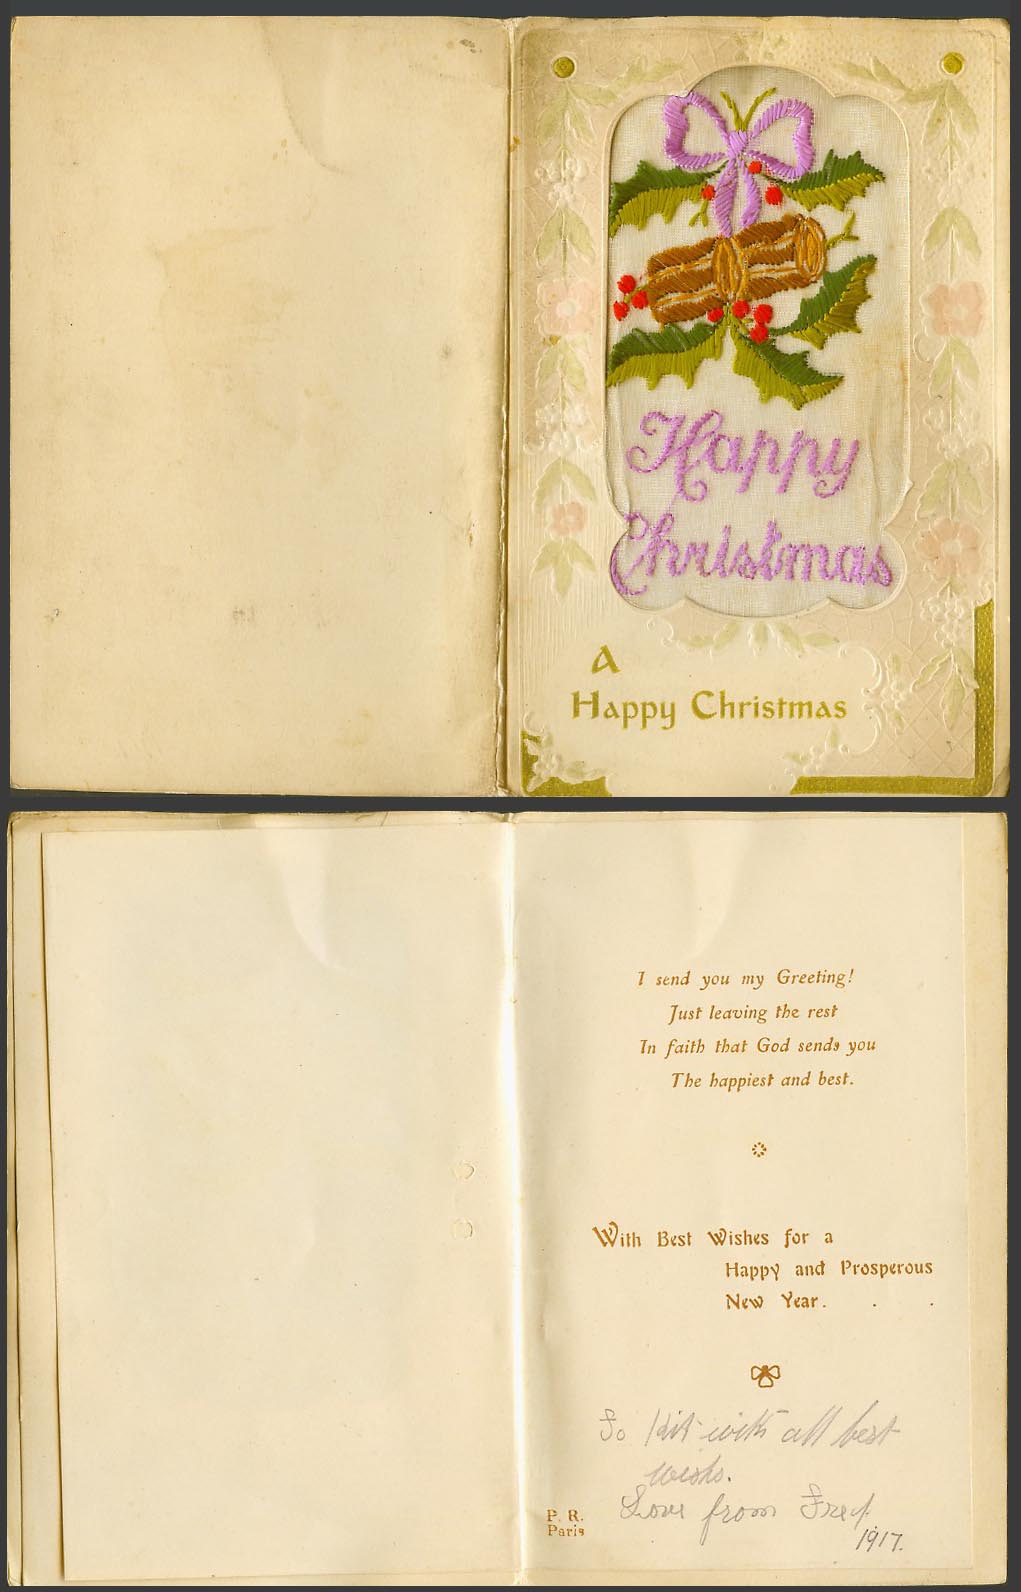 WW1 SILK Embroidered 1917 Old Greeting Card A Happy Christmas and New Year Holly